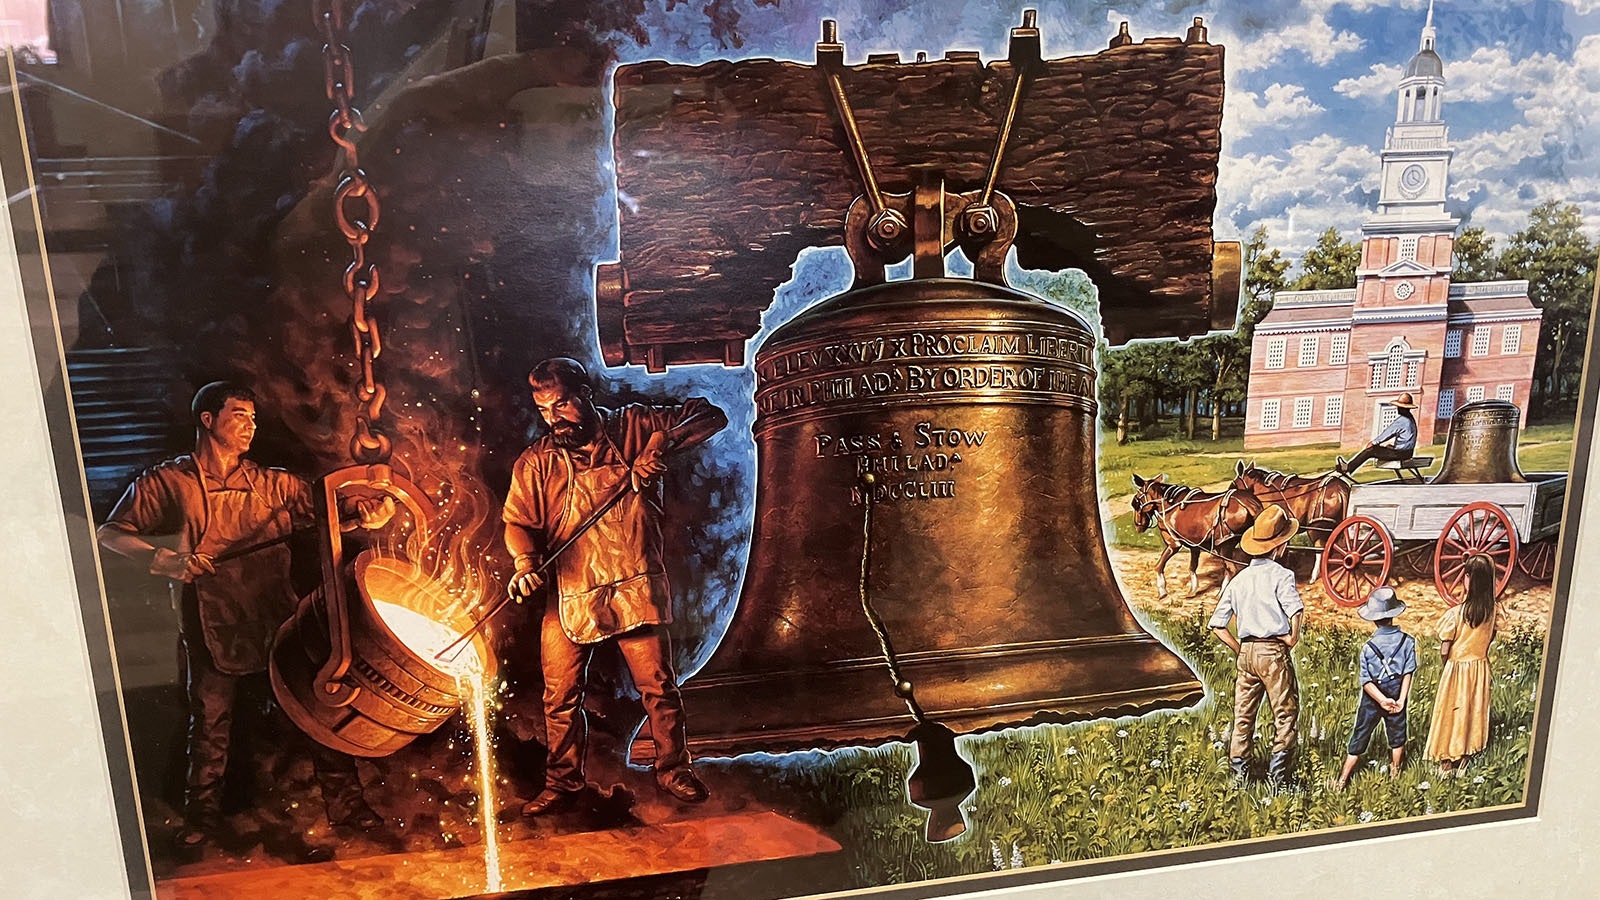 Late Excal foundry owner Fred Harmon commissioned this painting as part of the commemoration of his firm, Buckeye Brass creating the Liberty Bell replica.